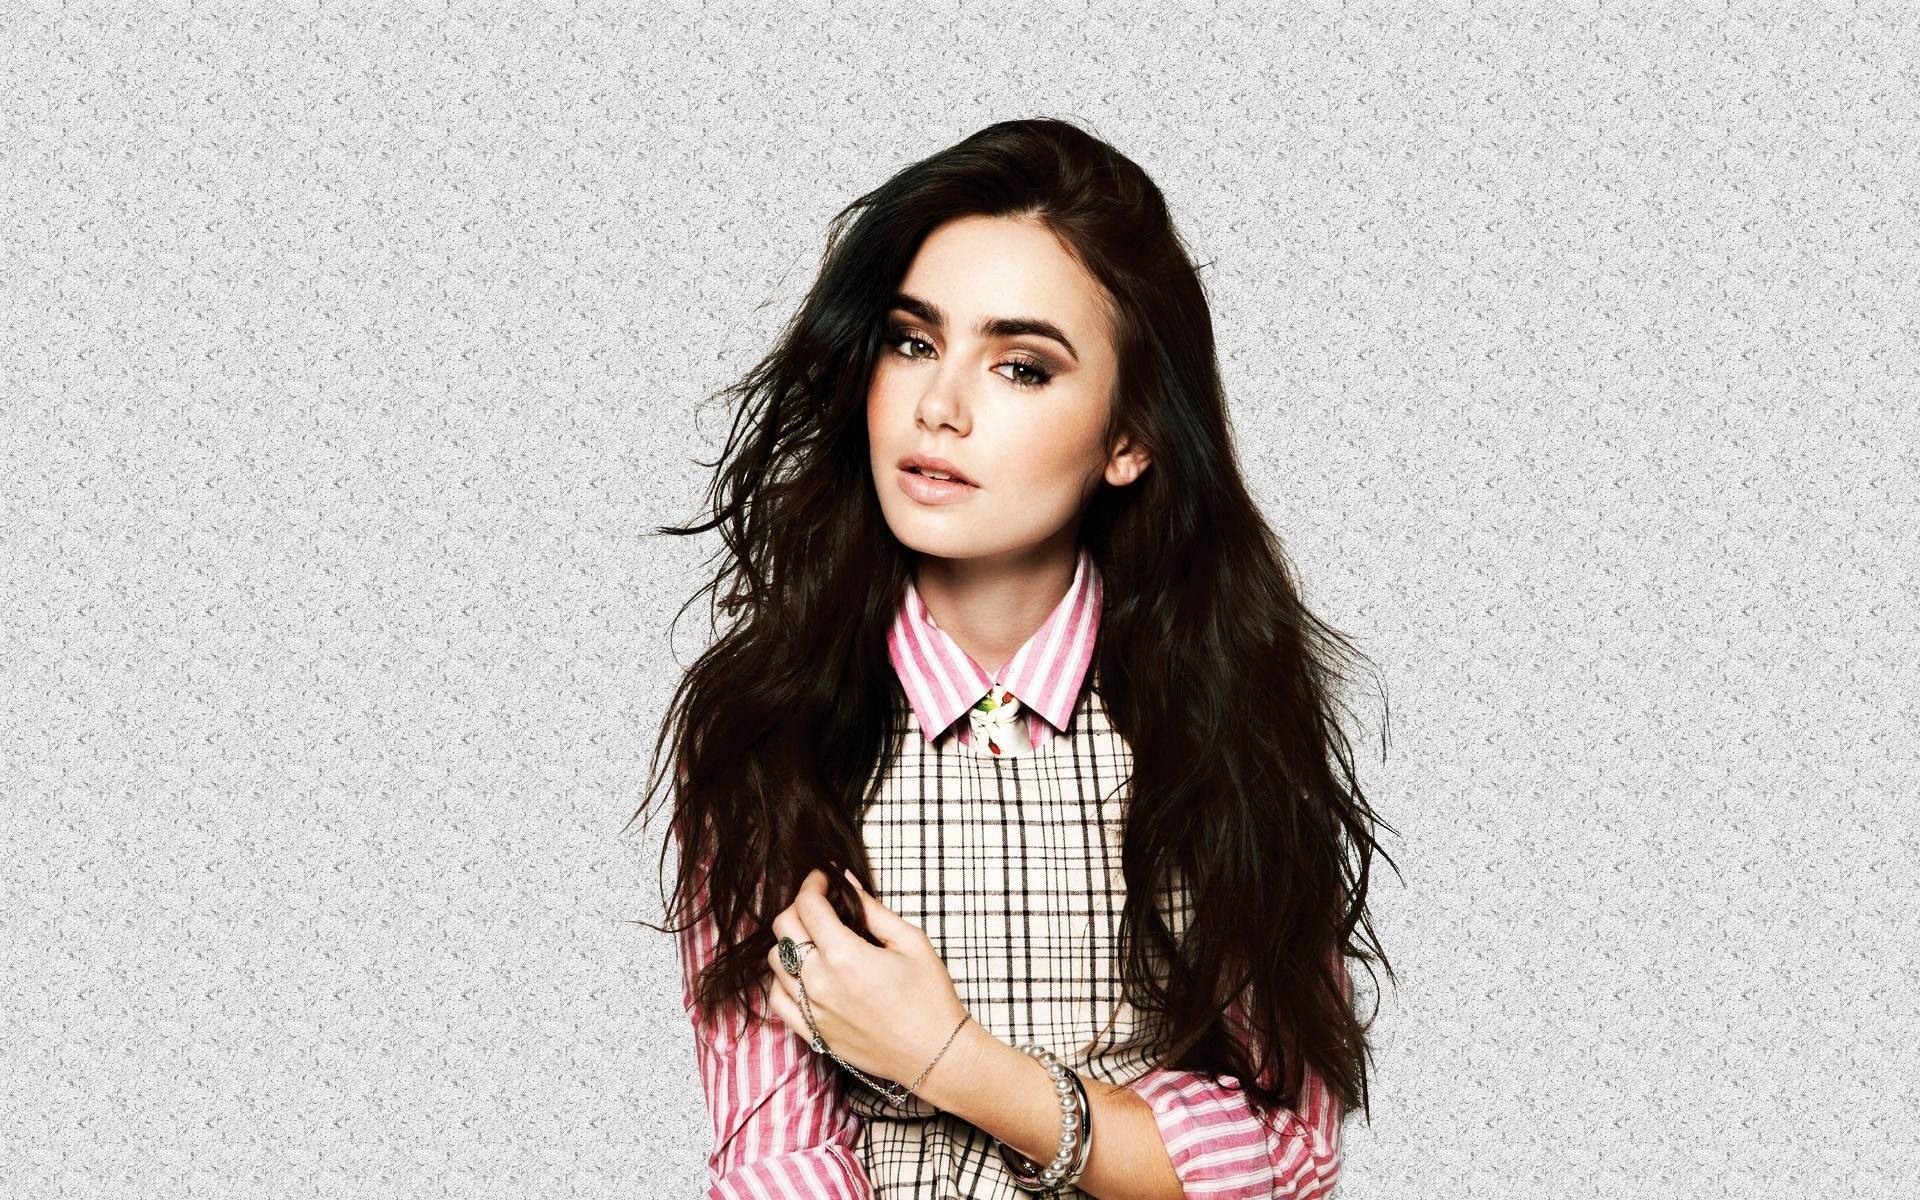 Lily Collins Wallpaper. Lily Collins Background